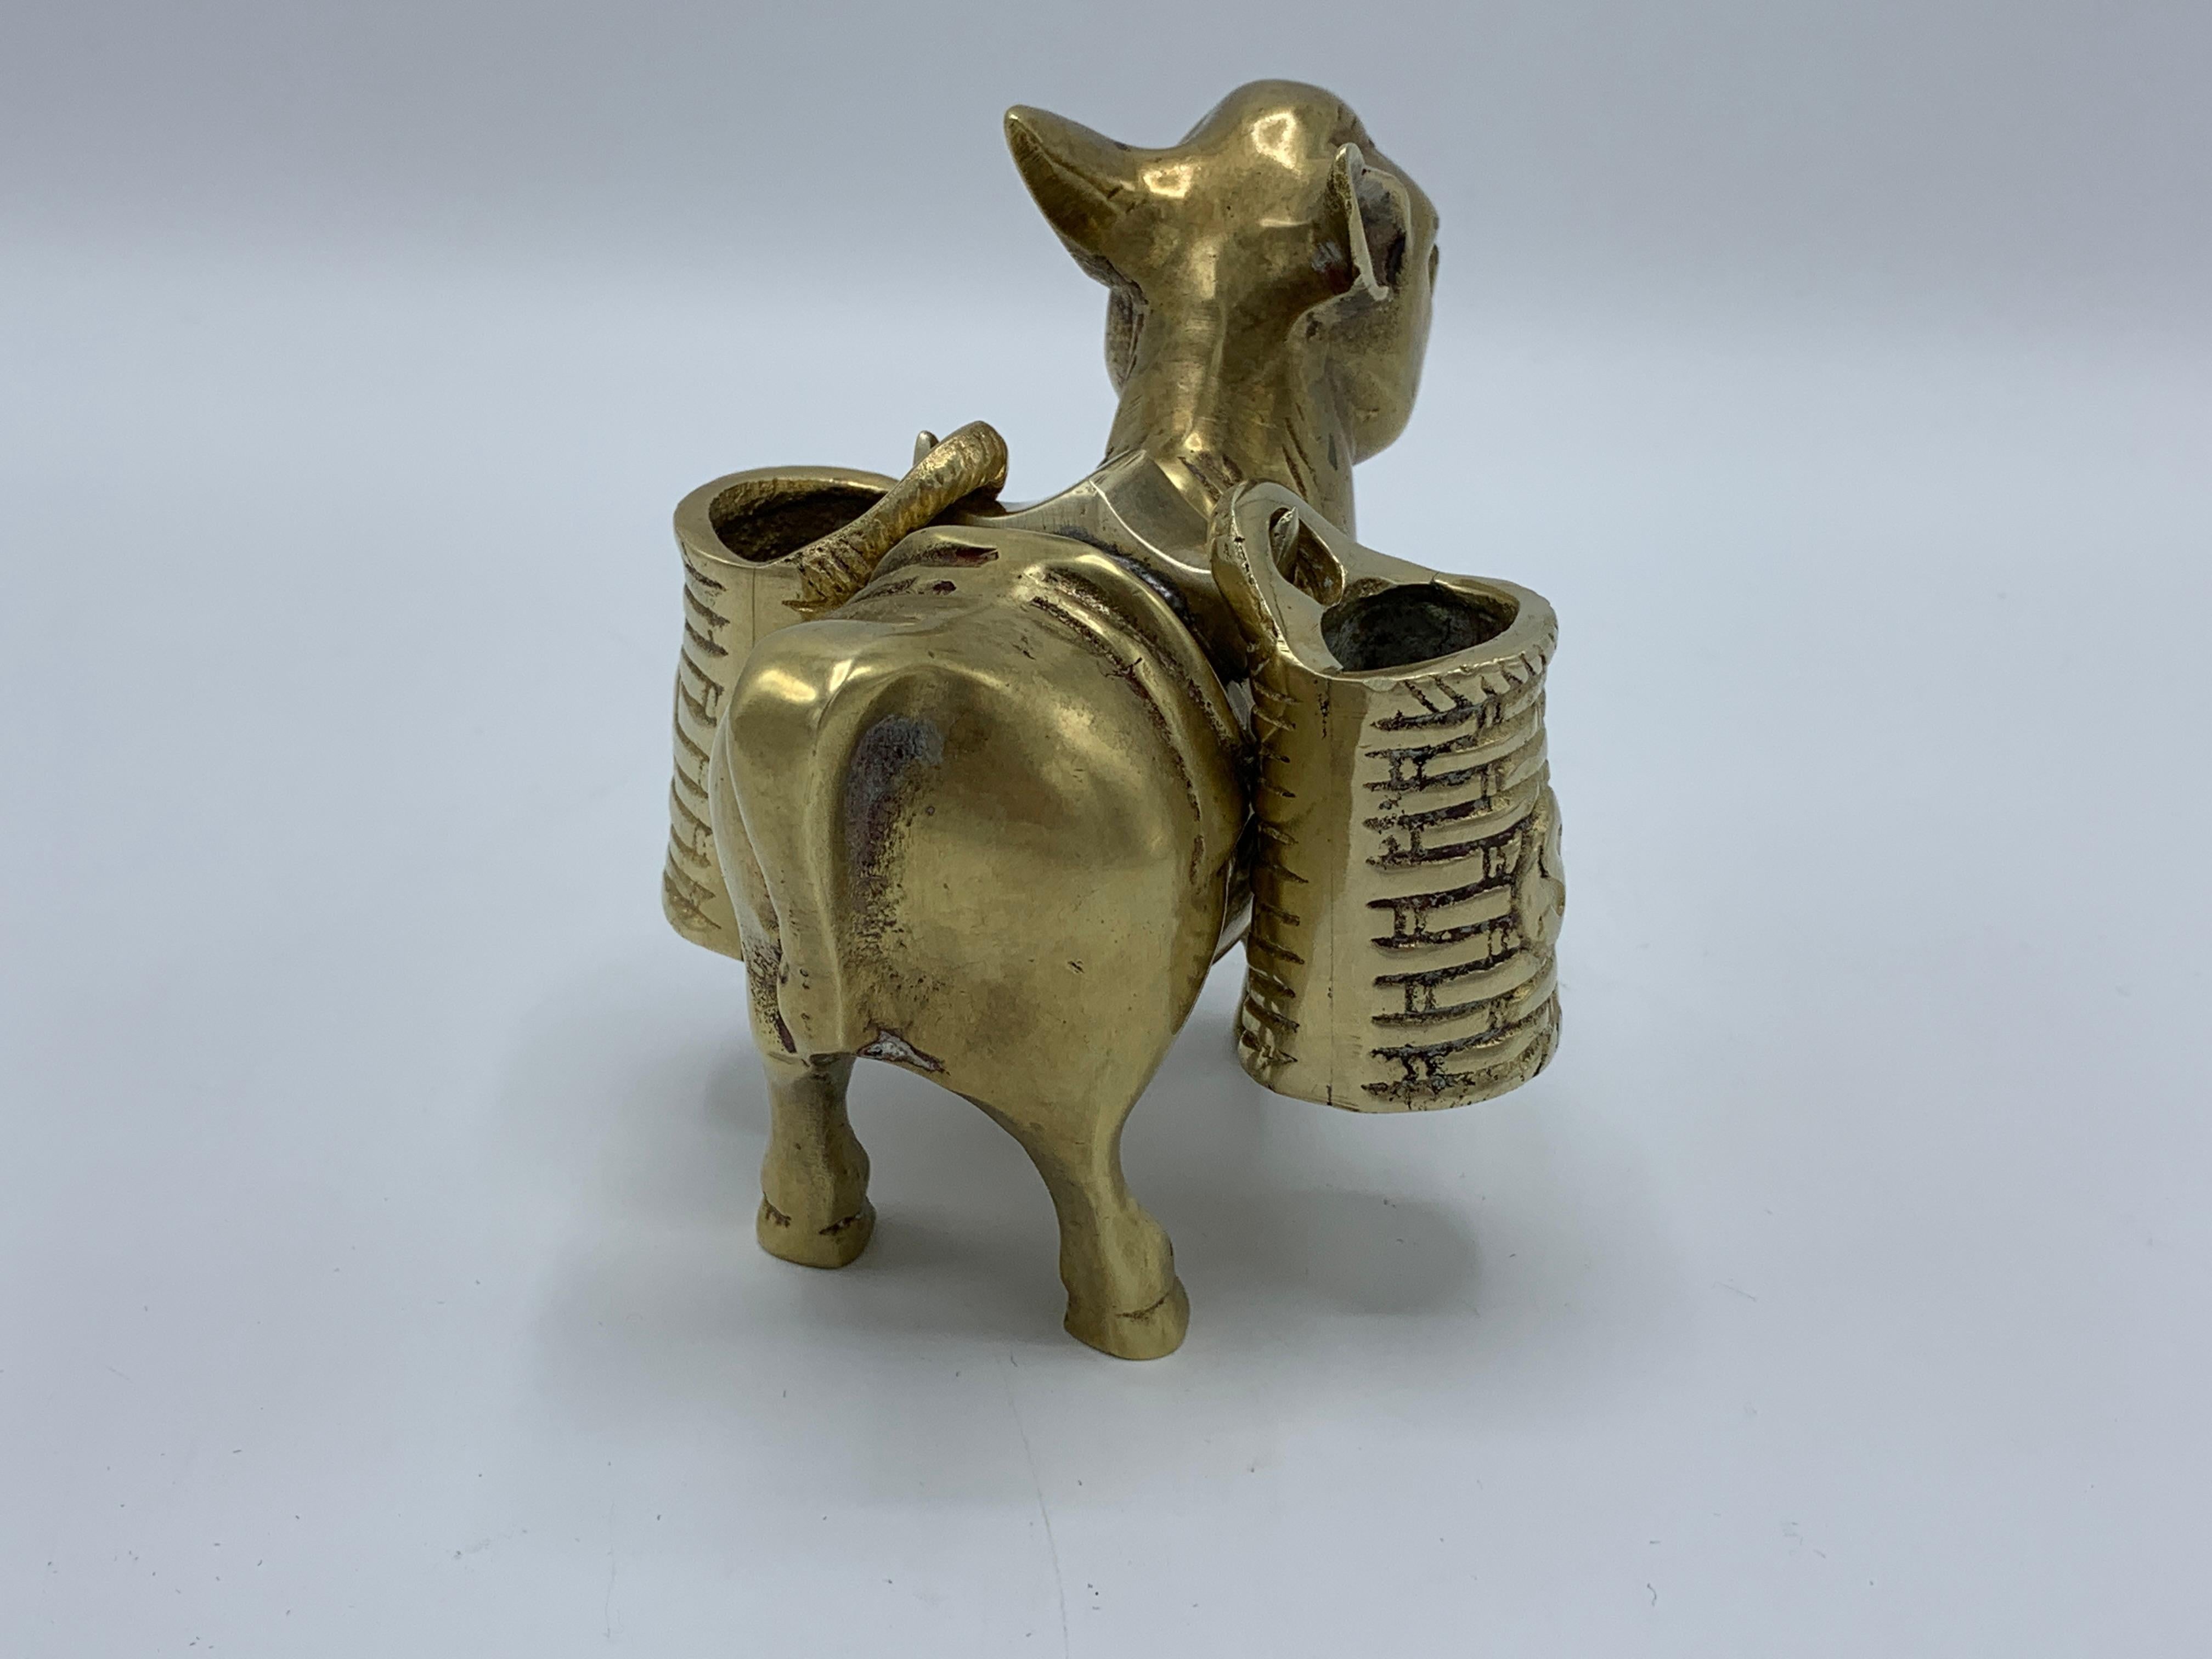 1960s Brass Mule with Saddle Bag Salt and Pepper Shaker Set 1